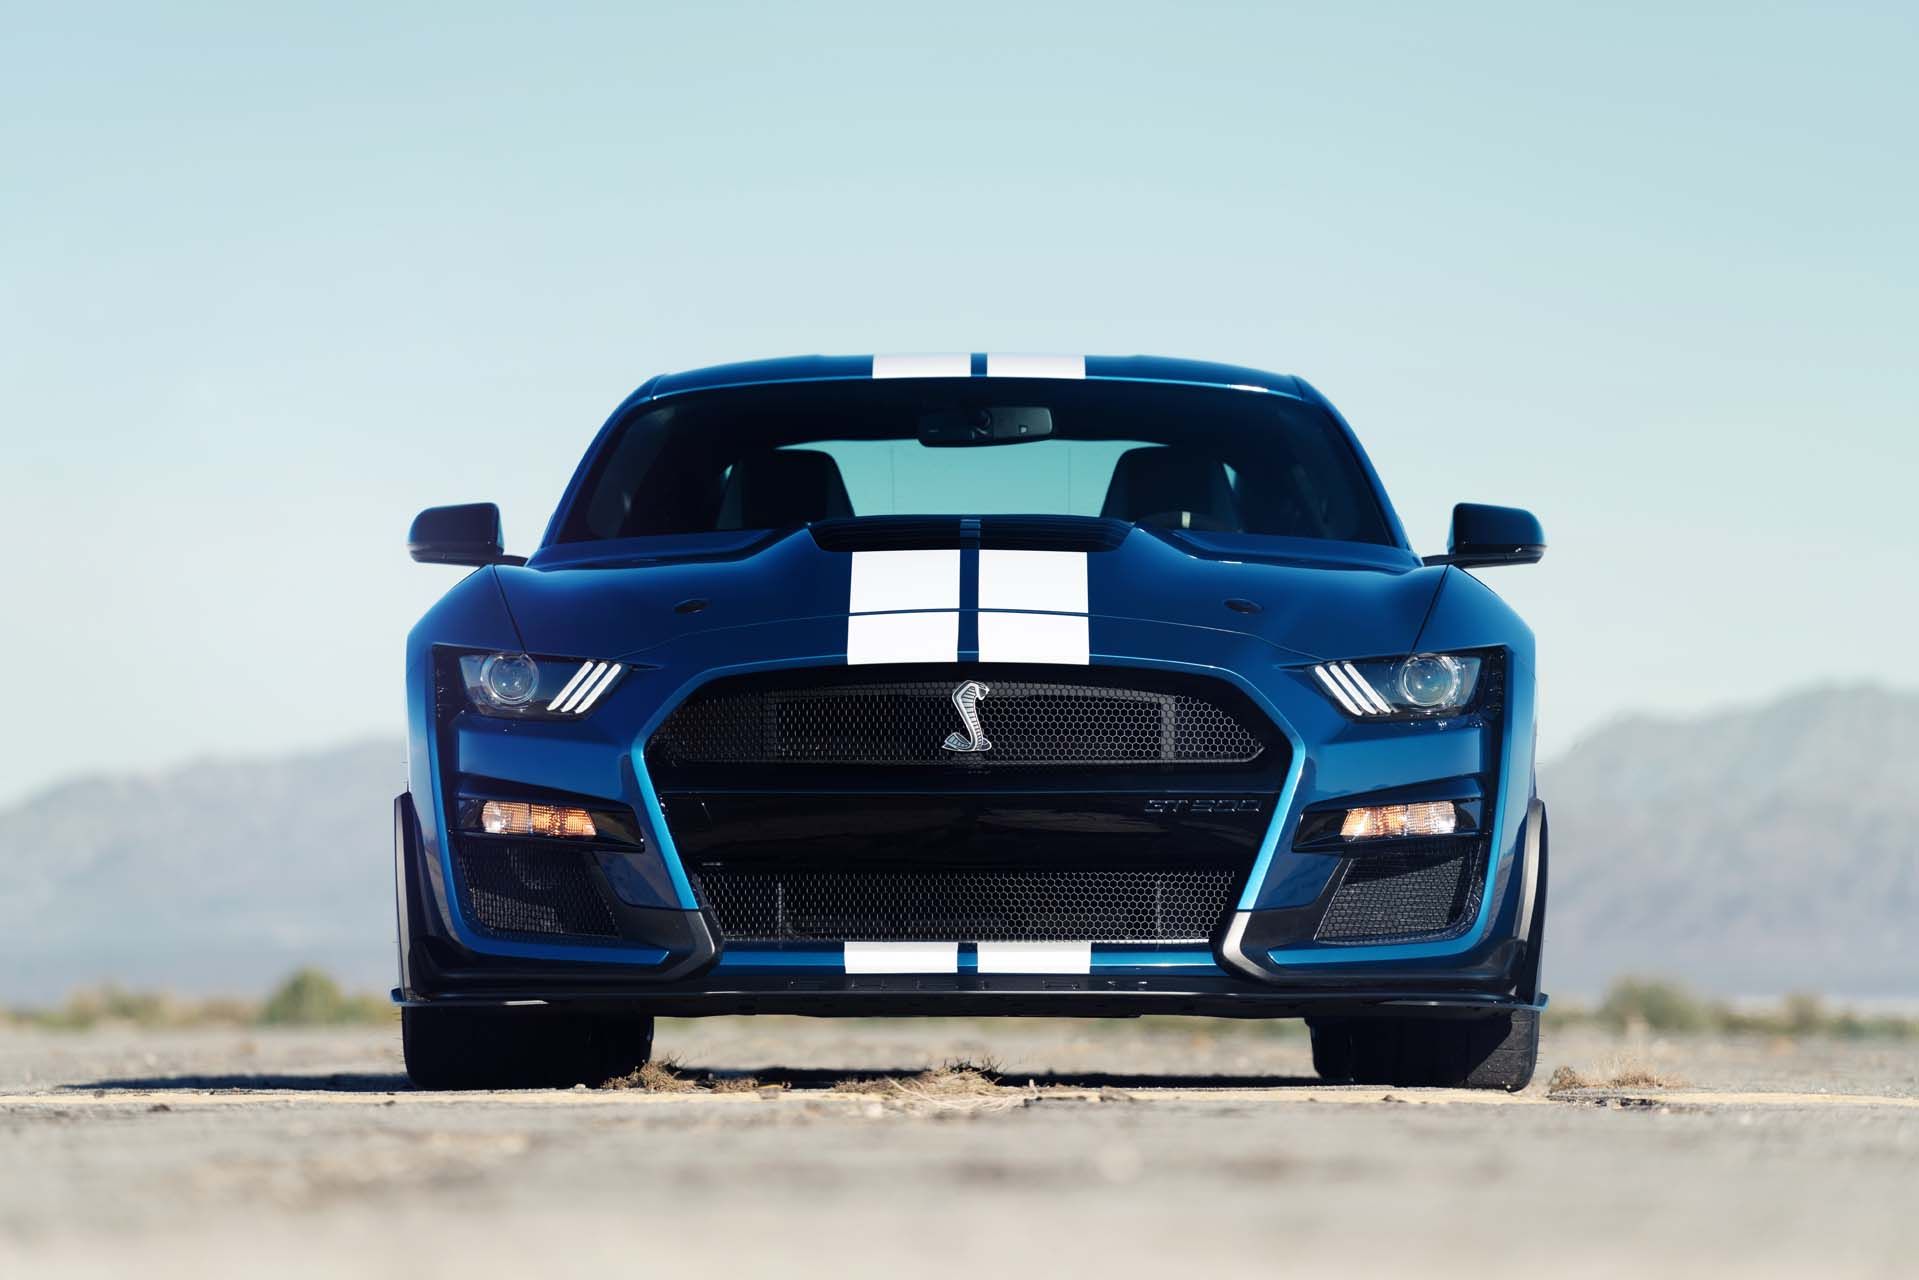 Ford Mustang Shelby GT500 Confirmed With 760 Horsepower And 625 Pound Feet